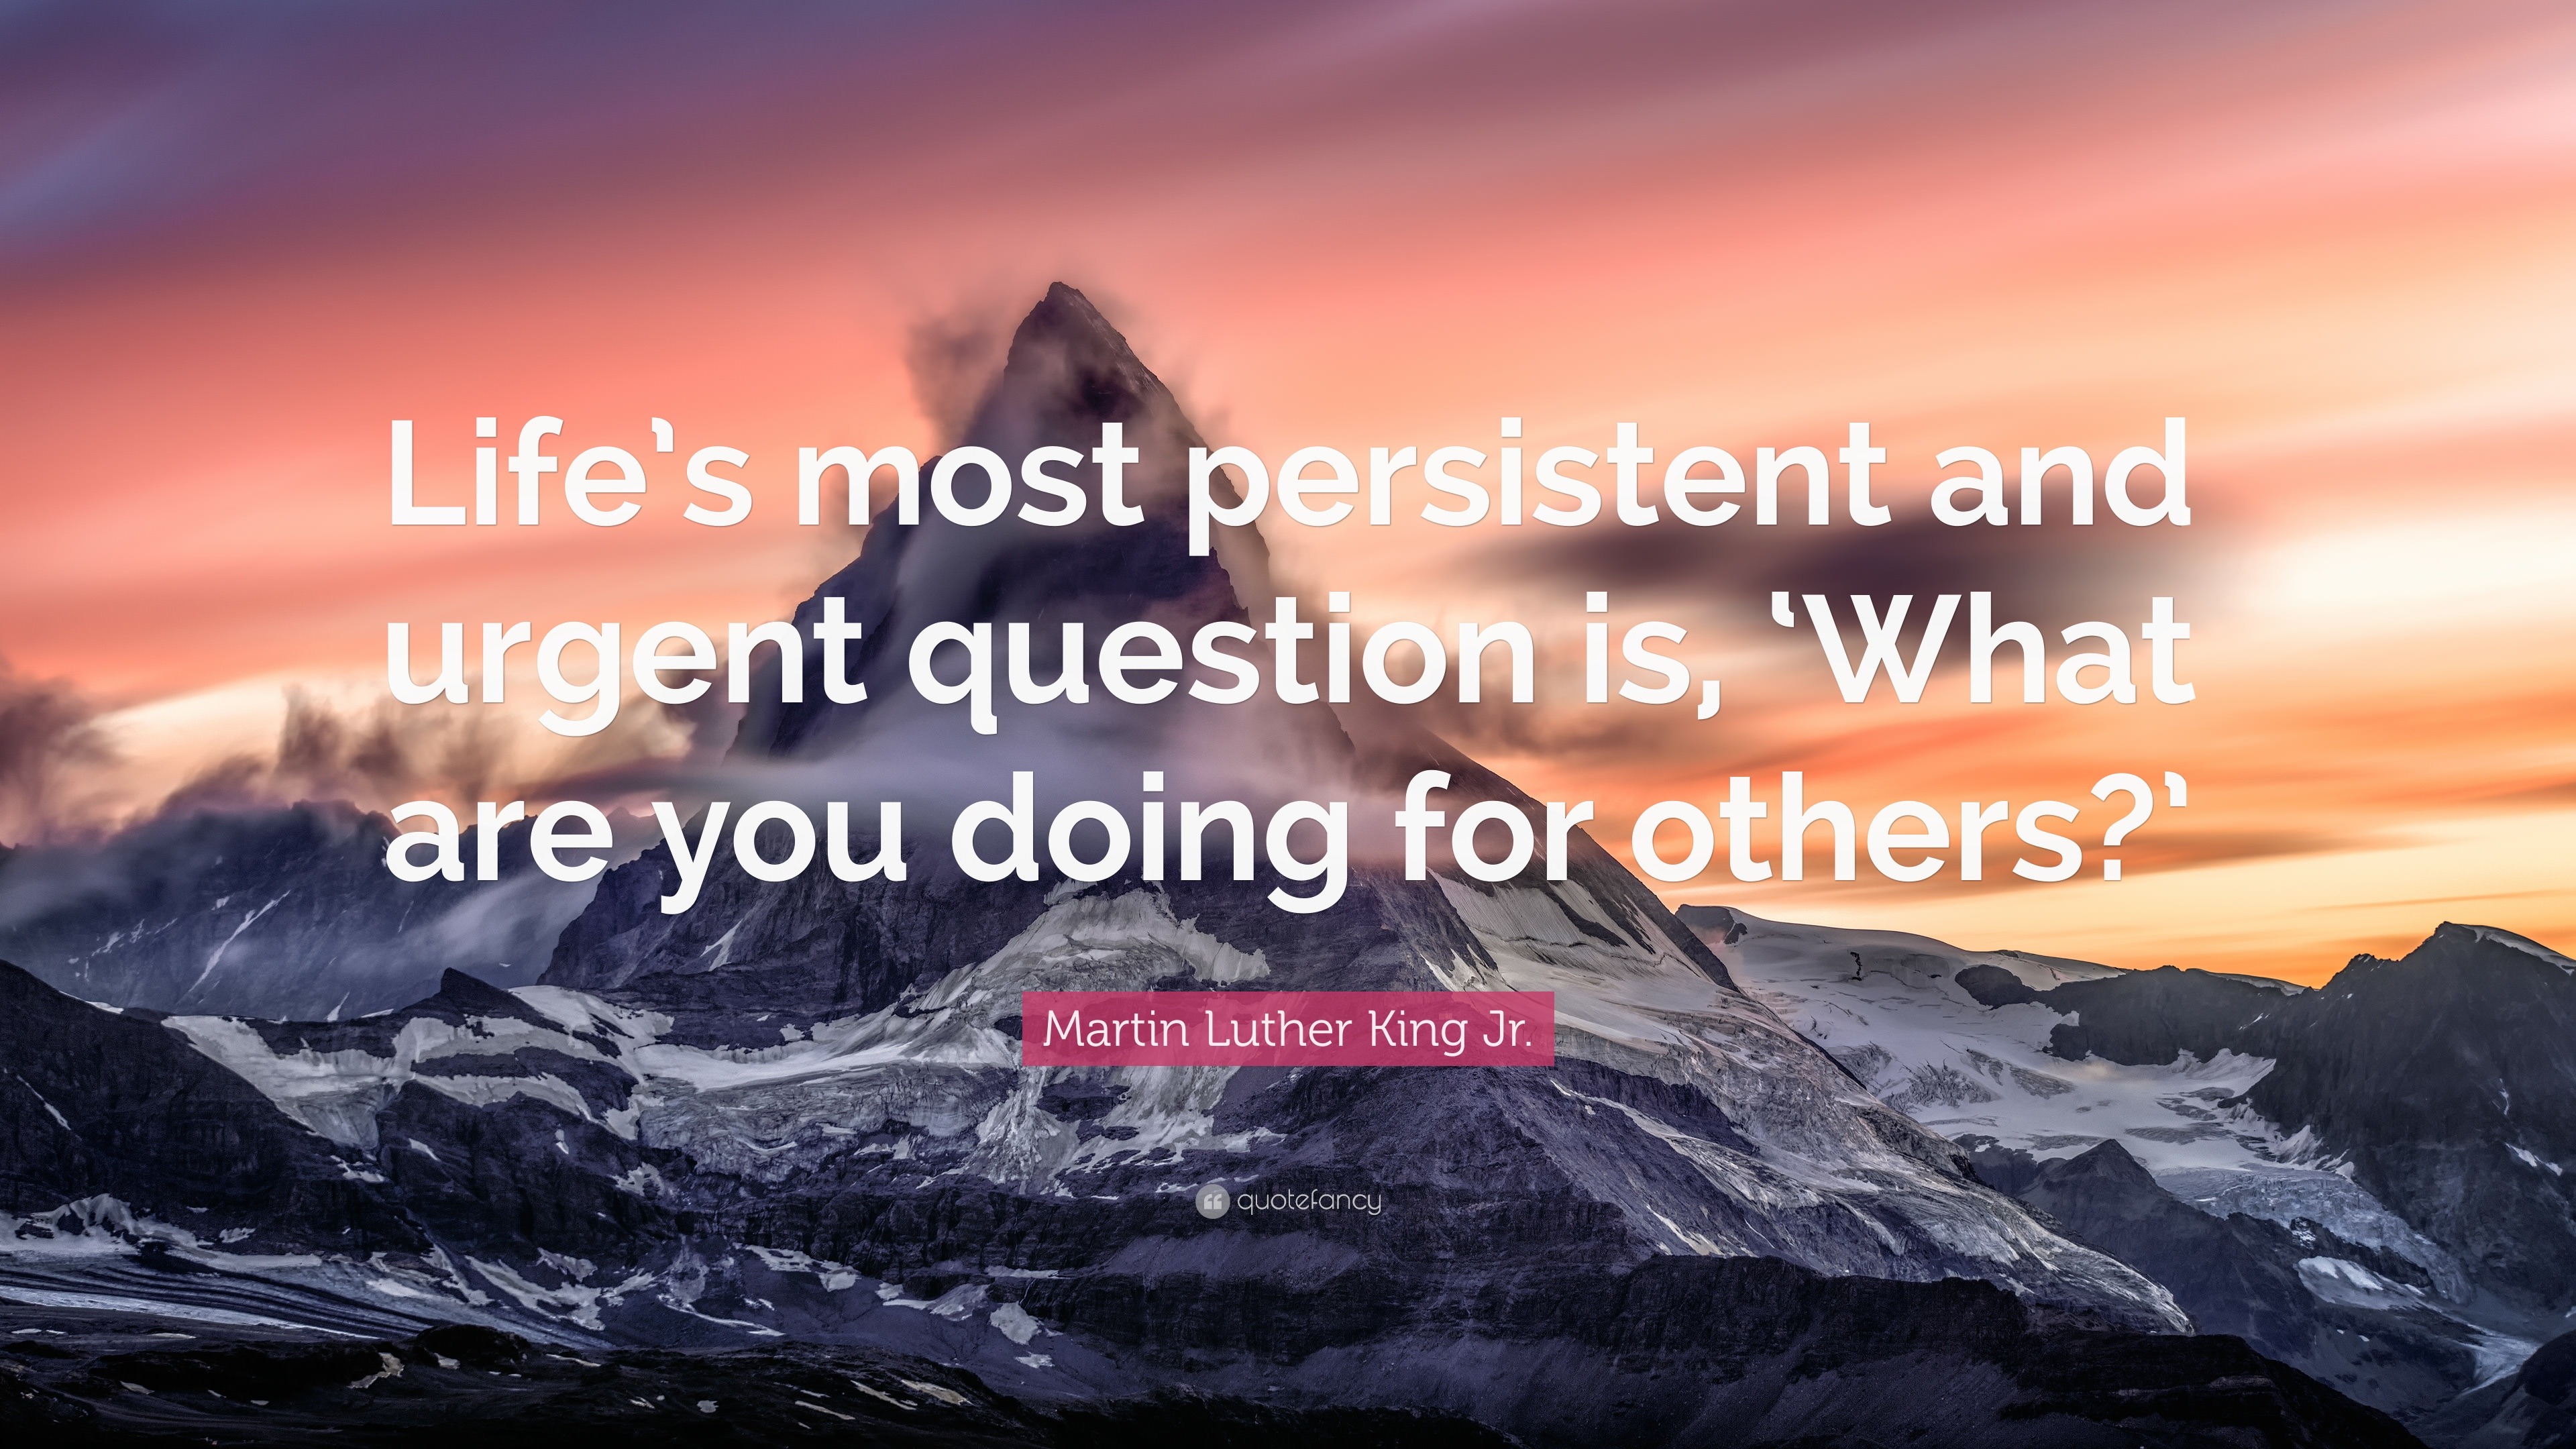 Martin Luther King Jr. Quote: “Life’s most persistent and urgent